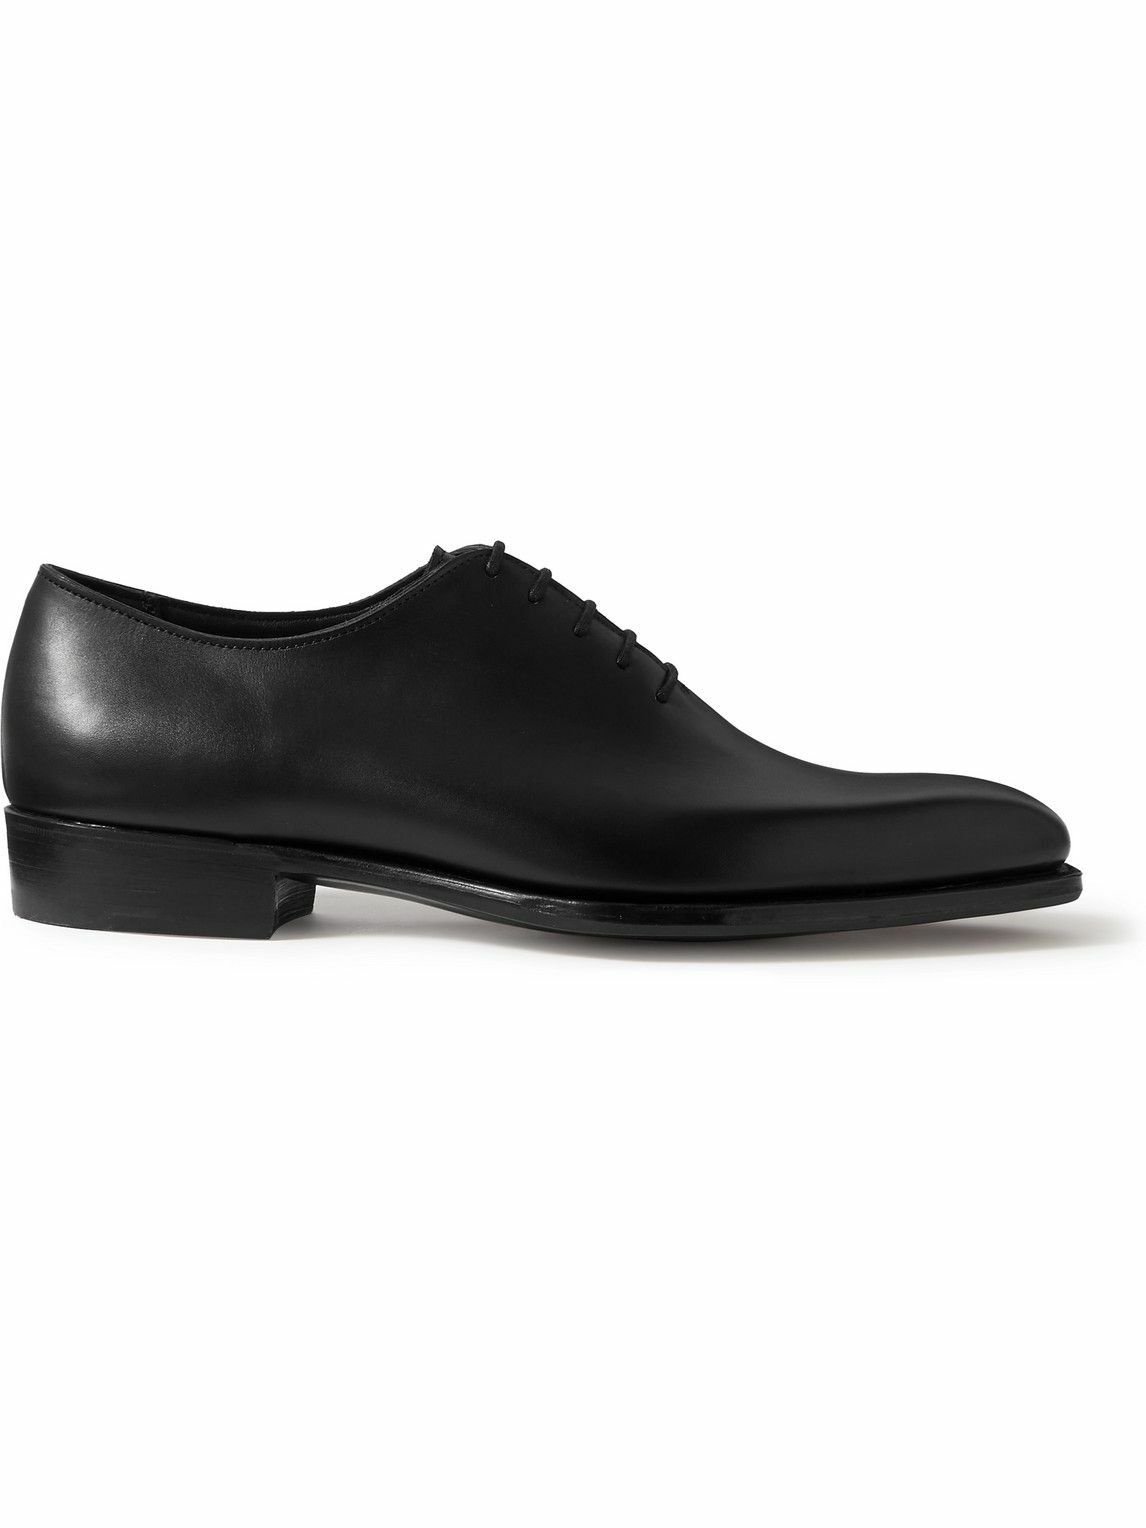 Photo: George Cleverley - Merlin Leather Oxford Shoes - Black